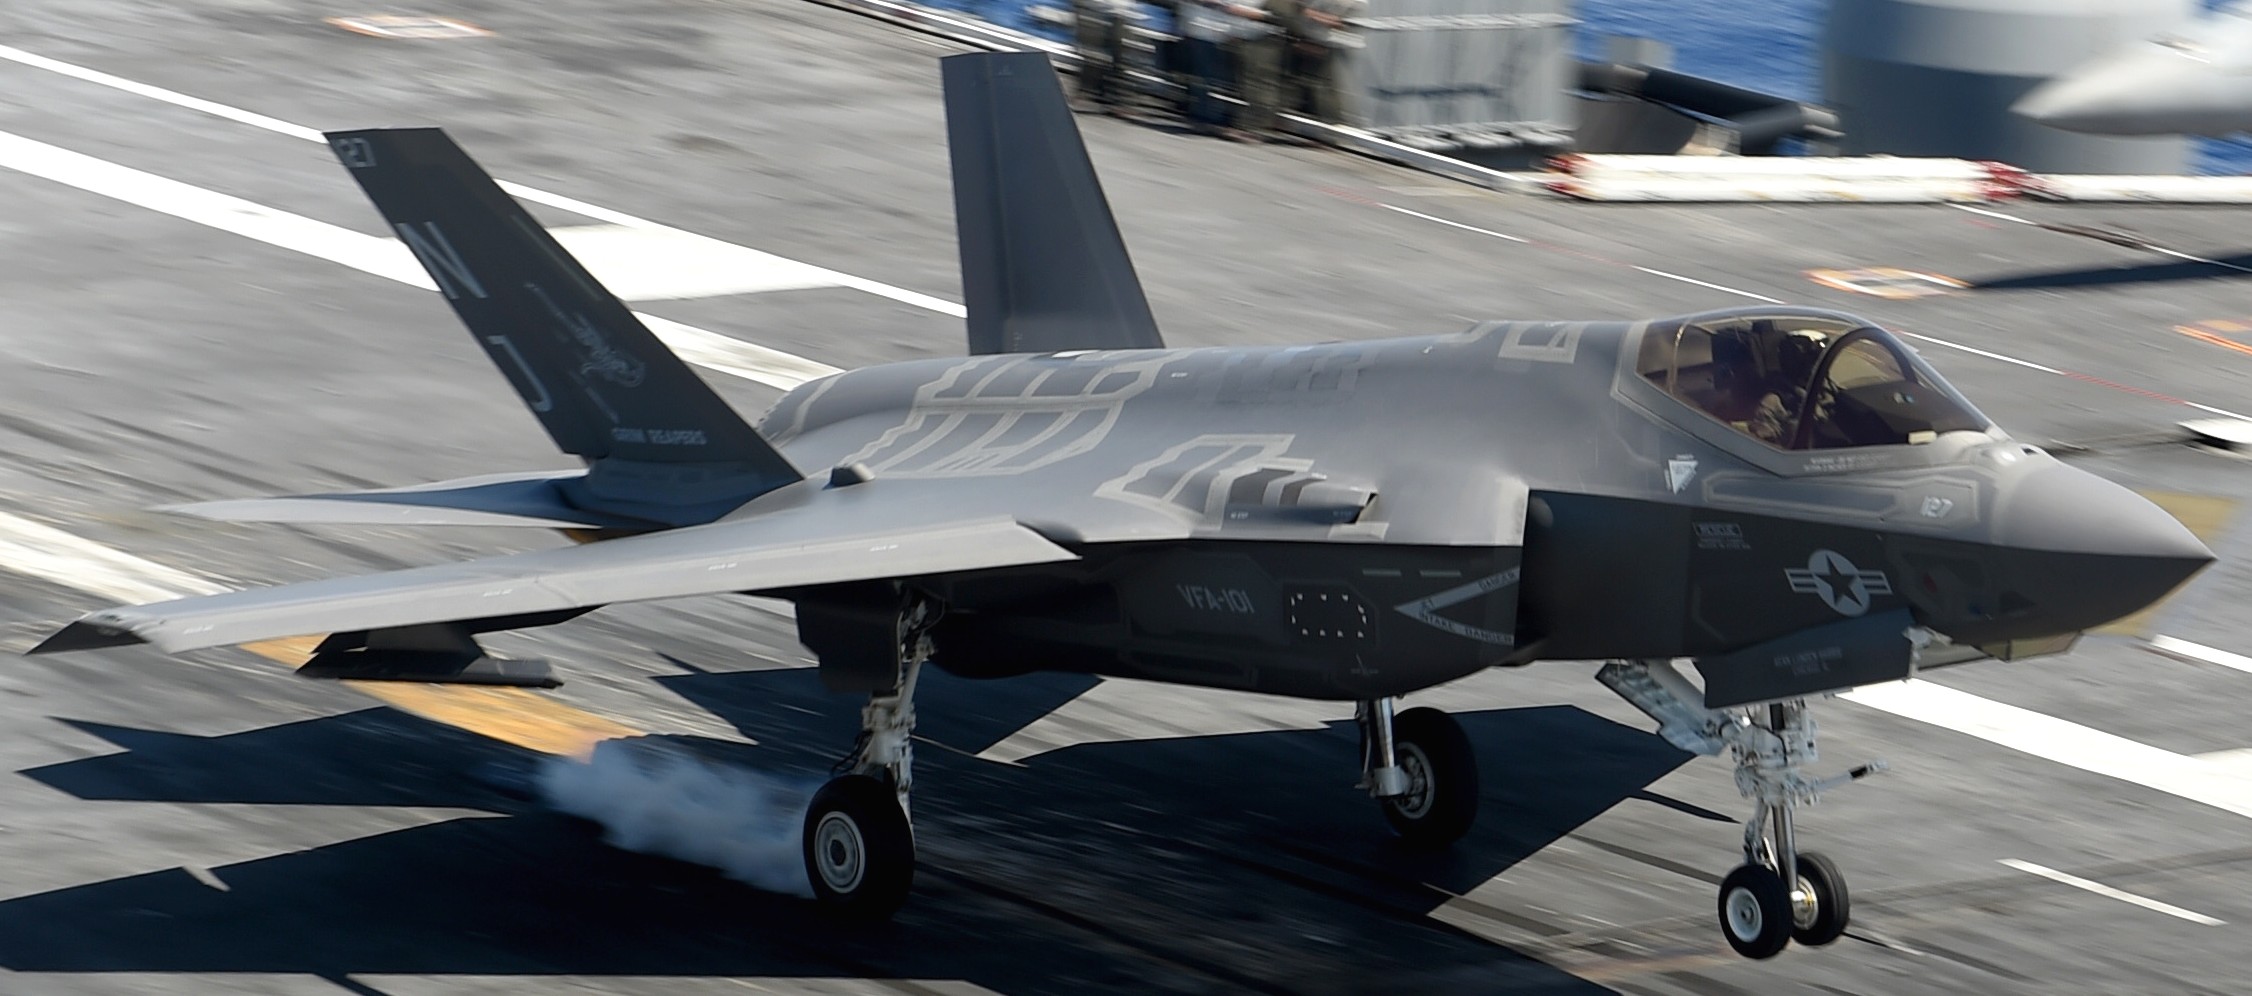 vfa-101 grim reapers strike fighter squadron f-35c lightning ii us navy uss abraham lincoln cvn-72 37